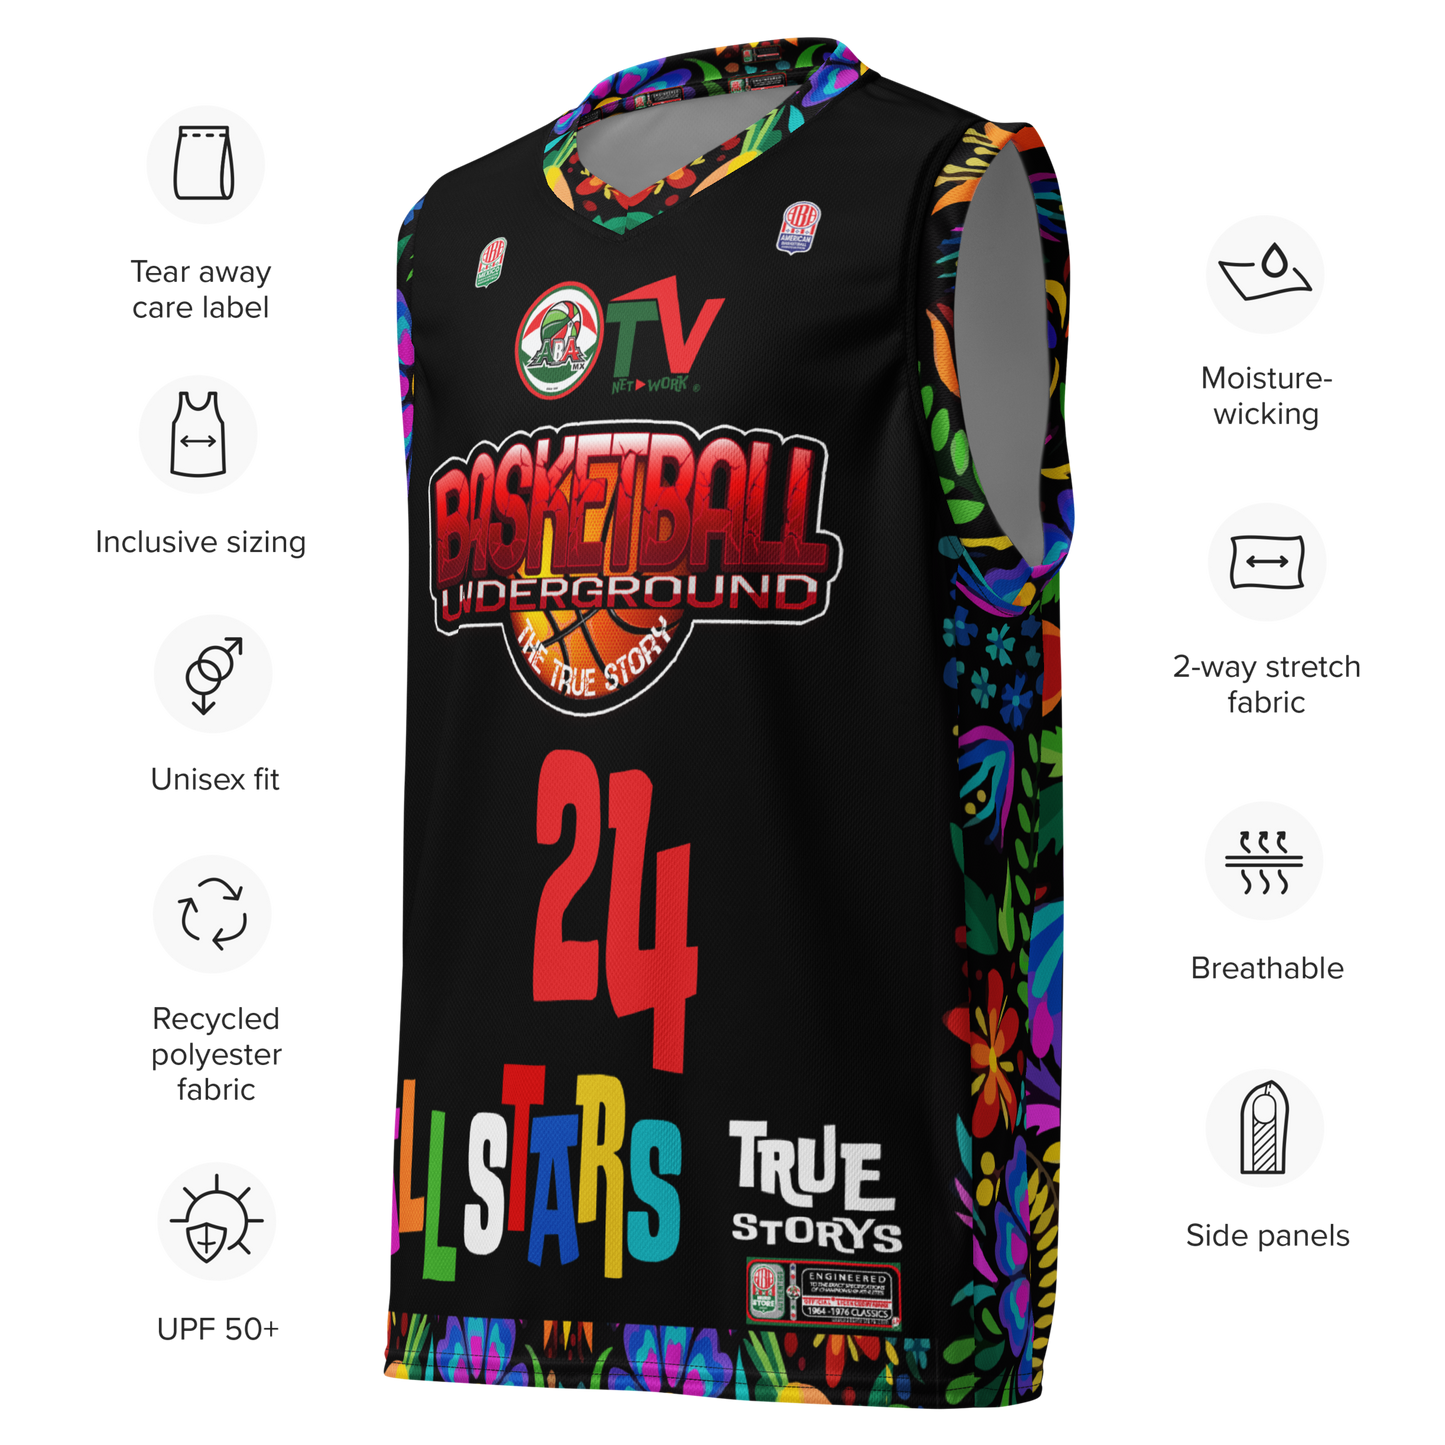 "The True Story" Limited Edition Basketball Underground Jersey! 🏀